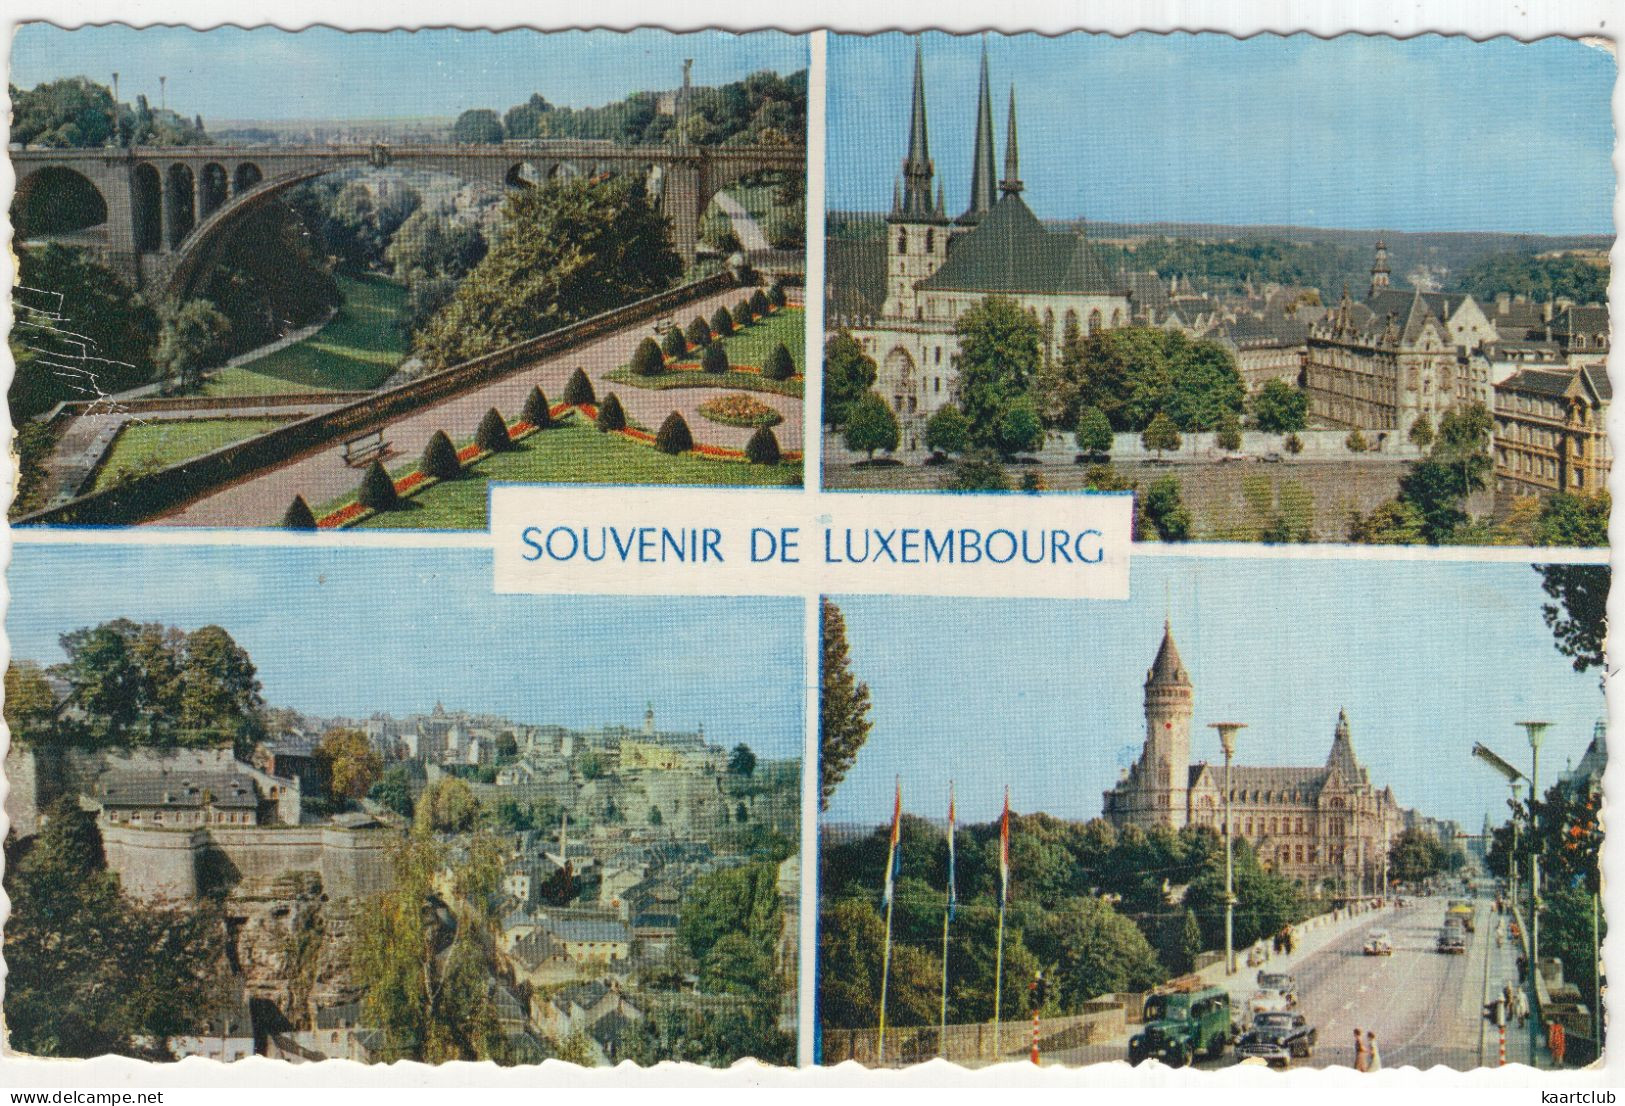 Souvenir De Luxembourg - (Luxembourg) - Luxemburg - Town